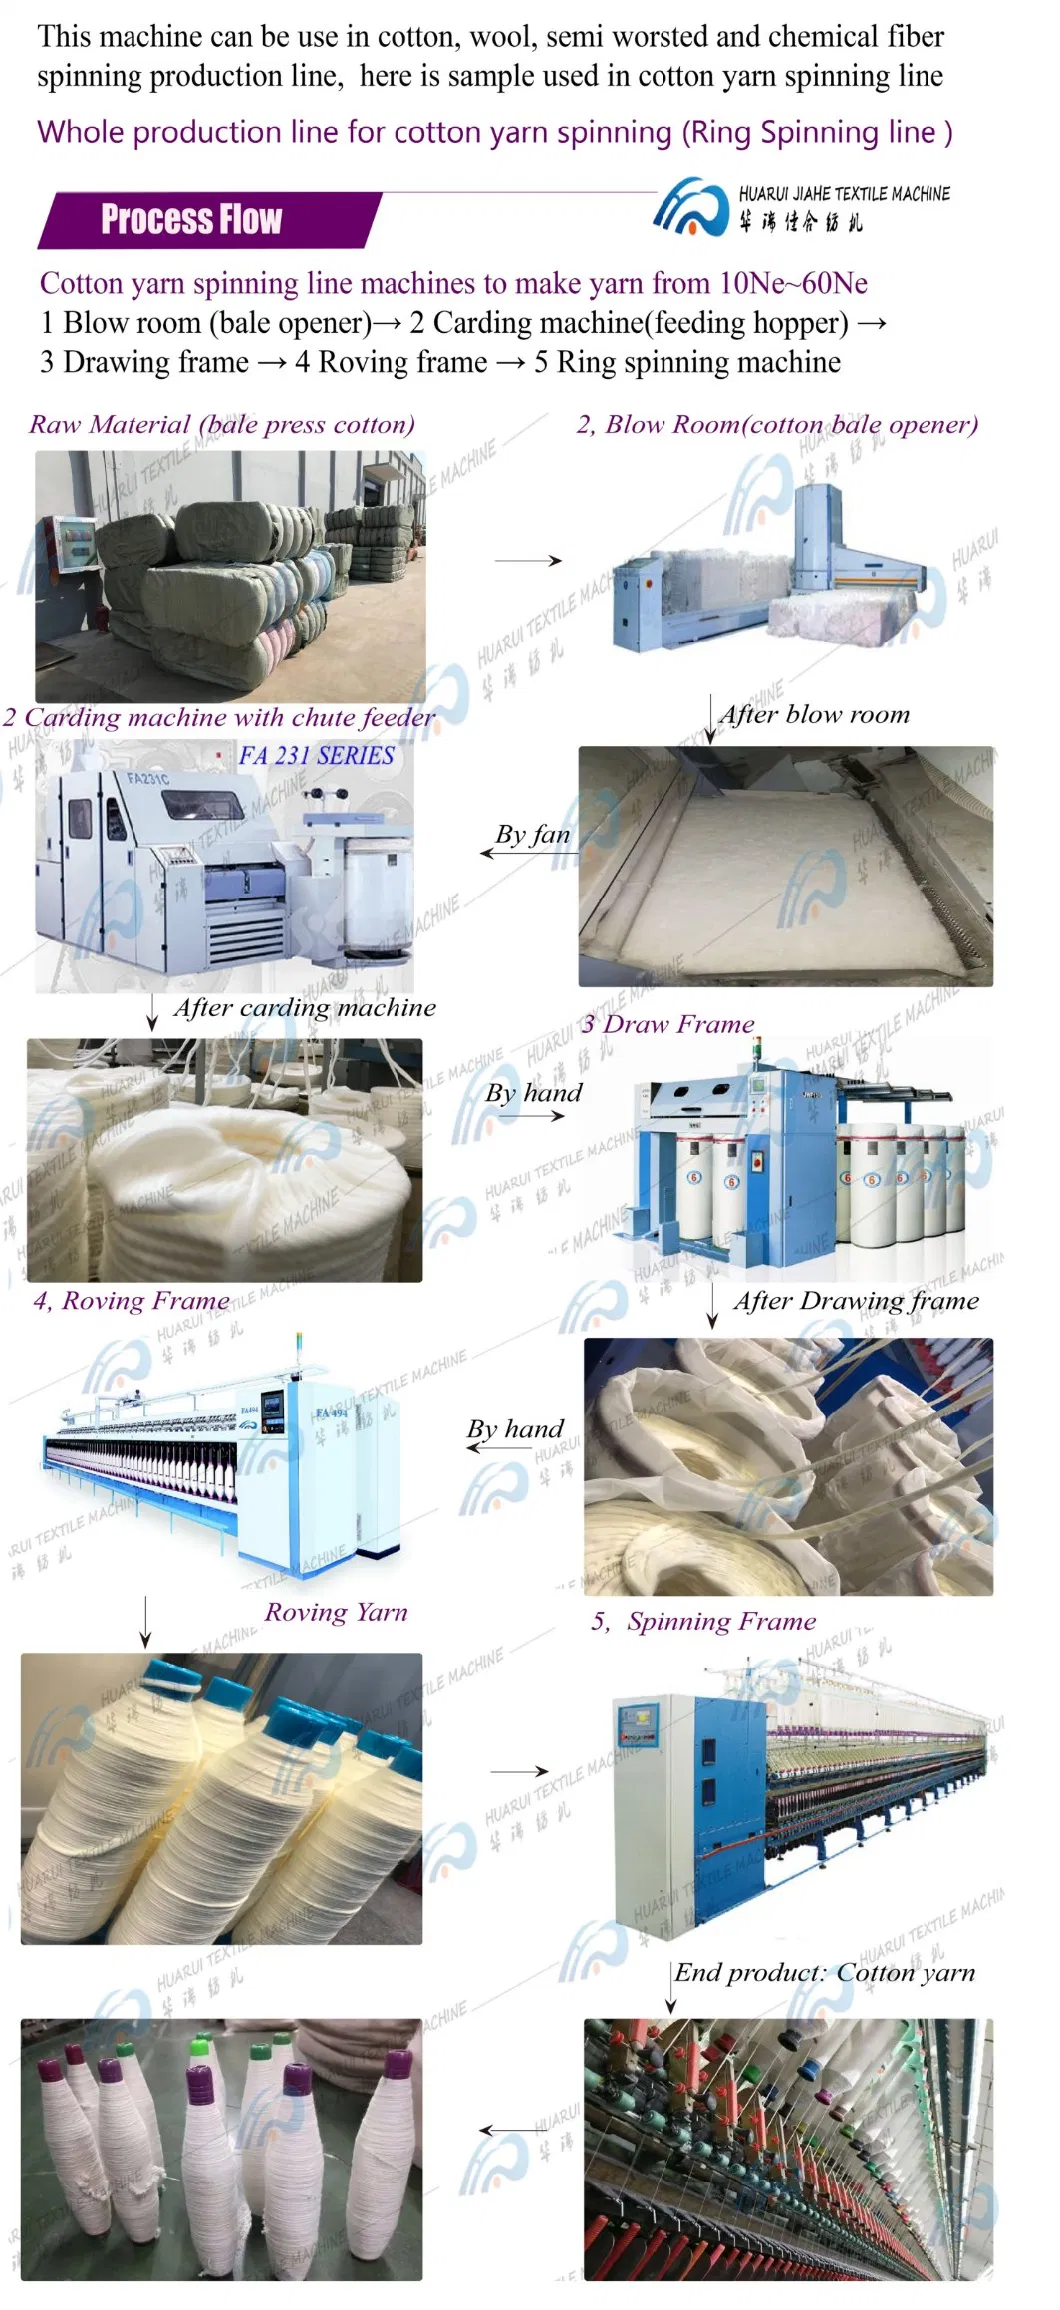 One Yarn and Reeled Yarn Dual Purpose Dryer Gfg High Efficiency Milk Cheese Protein Powder Granules Fluid Bed Dryer Fluidized Bed Drying Machine